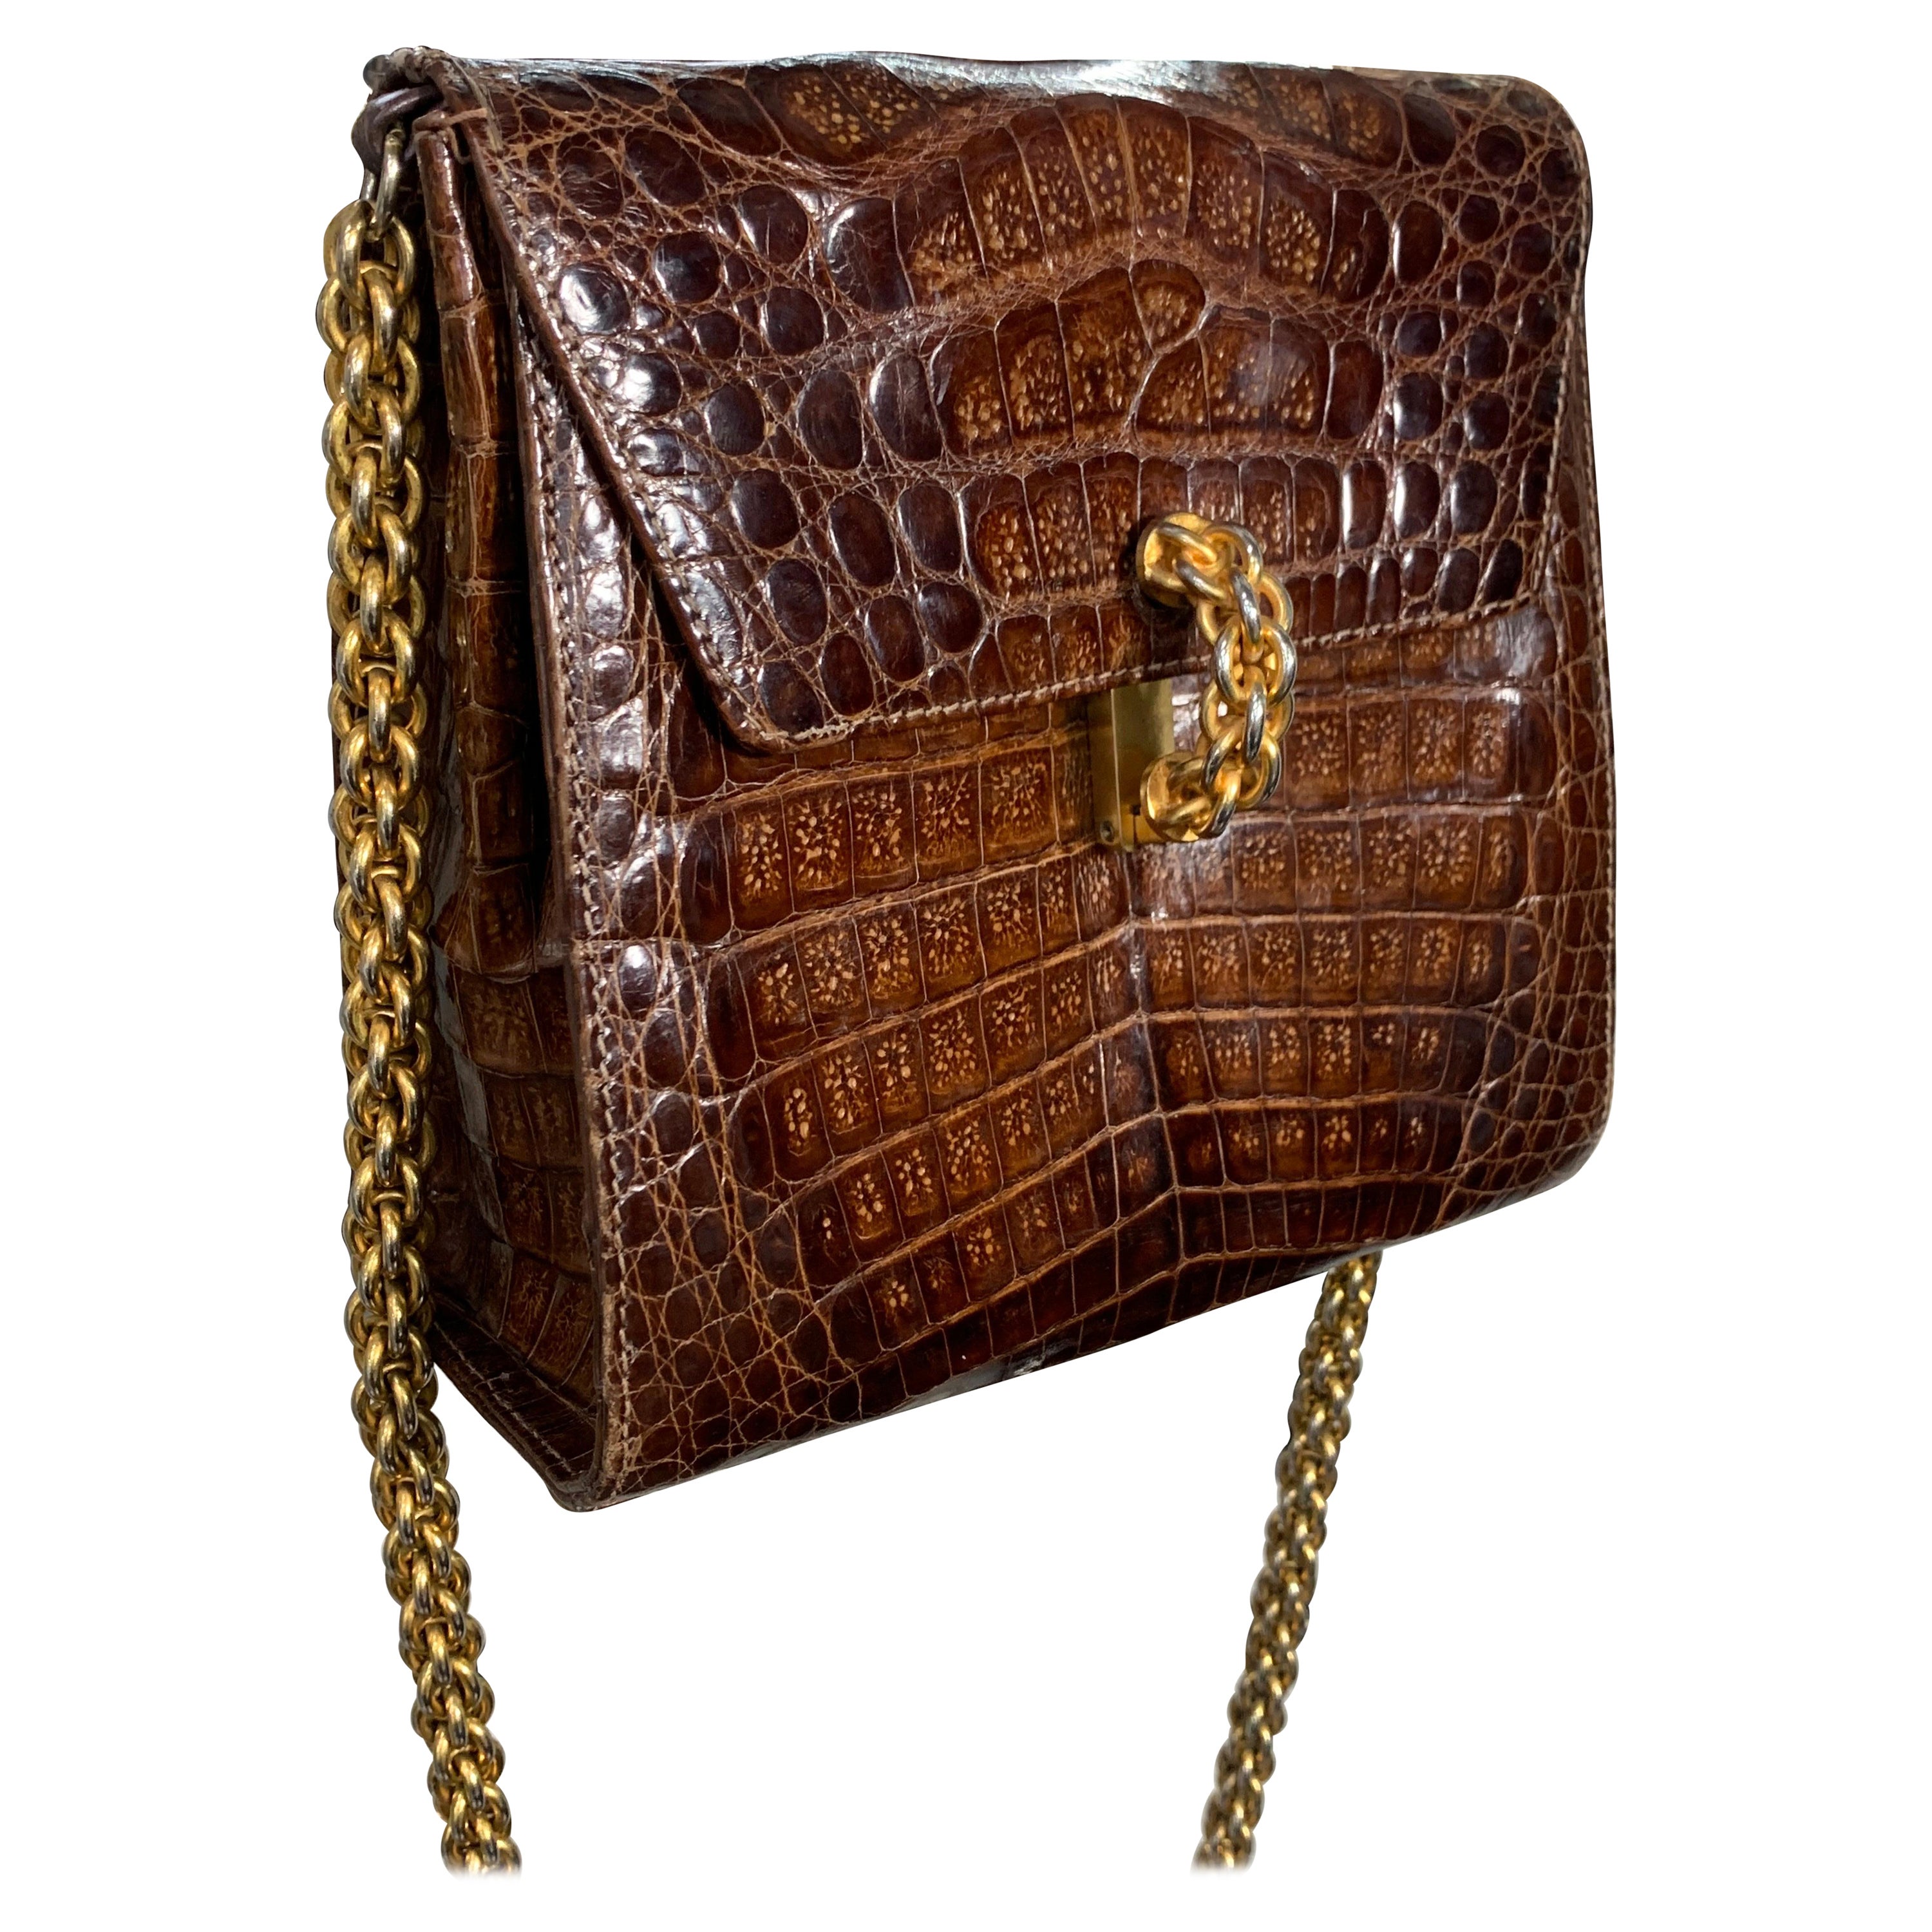 1990 Paloma Picasso Brown Alligator Shoulder Bag w Heavy Rope Chain Strap For Sale